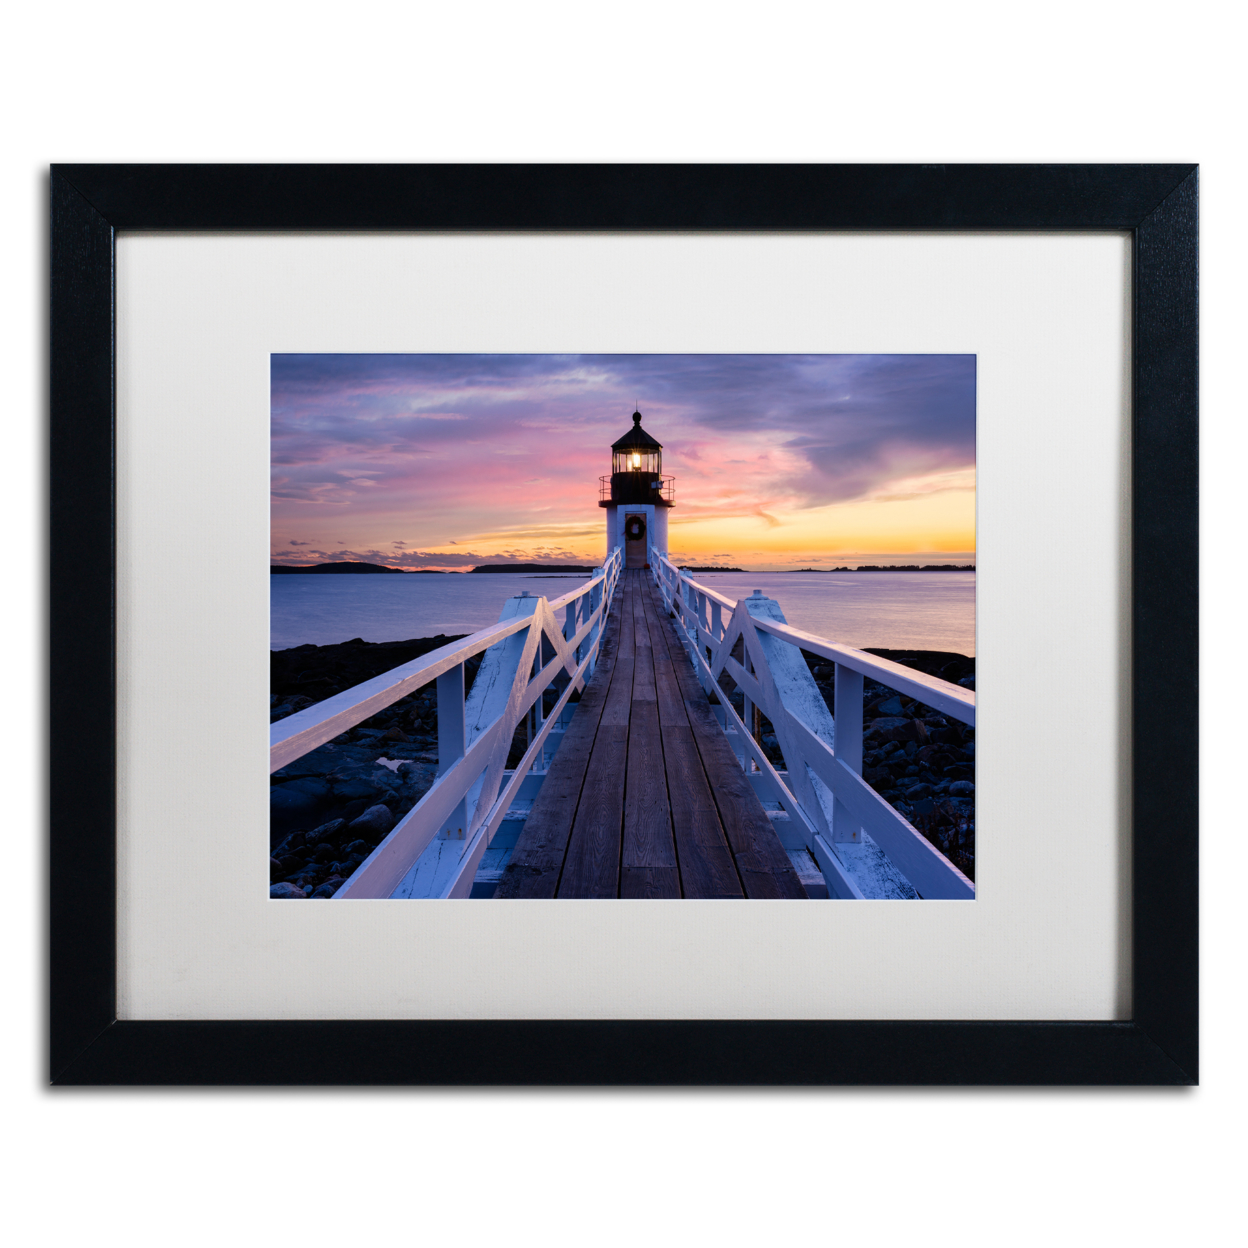 Michael Blanchette Photography 'December Hues' Black Wooden Framed Art 18 X 22 Inches